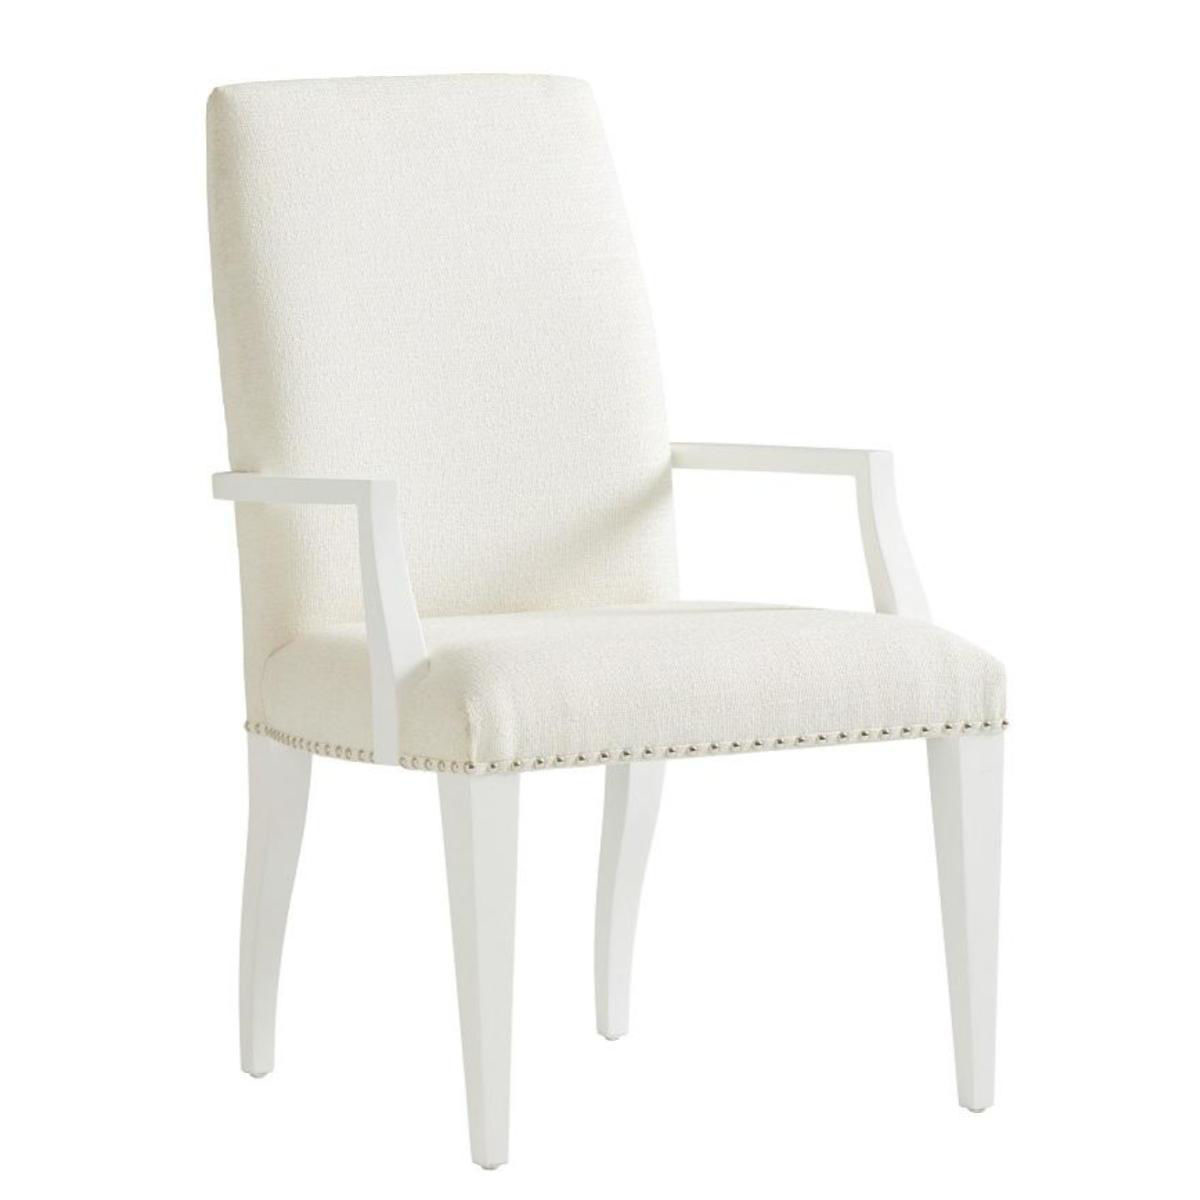 Picture of DARIEN UPHOLSTERED ARM CHAIR (221811)